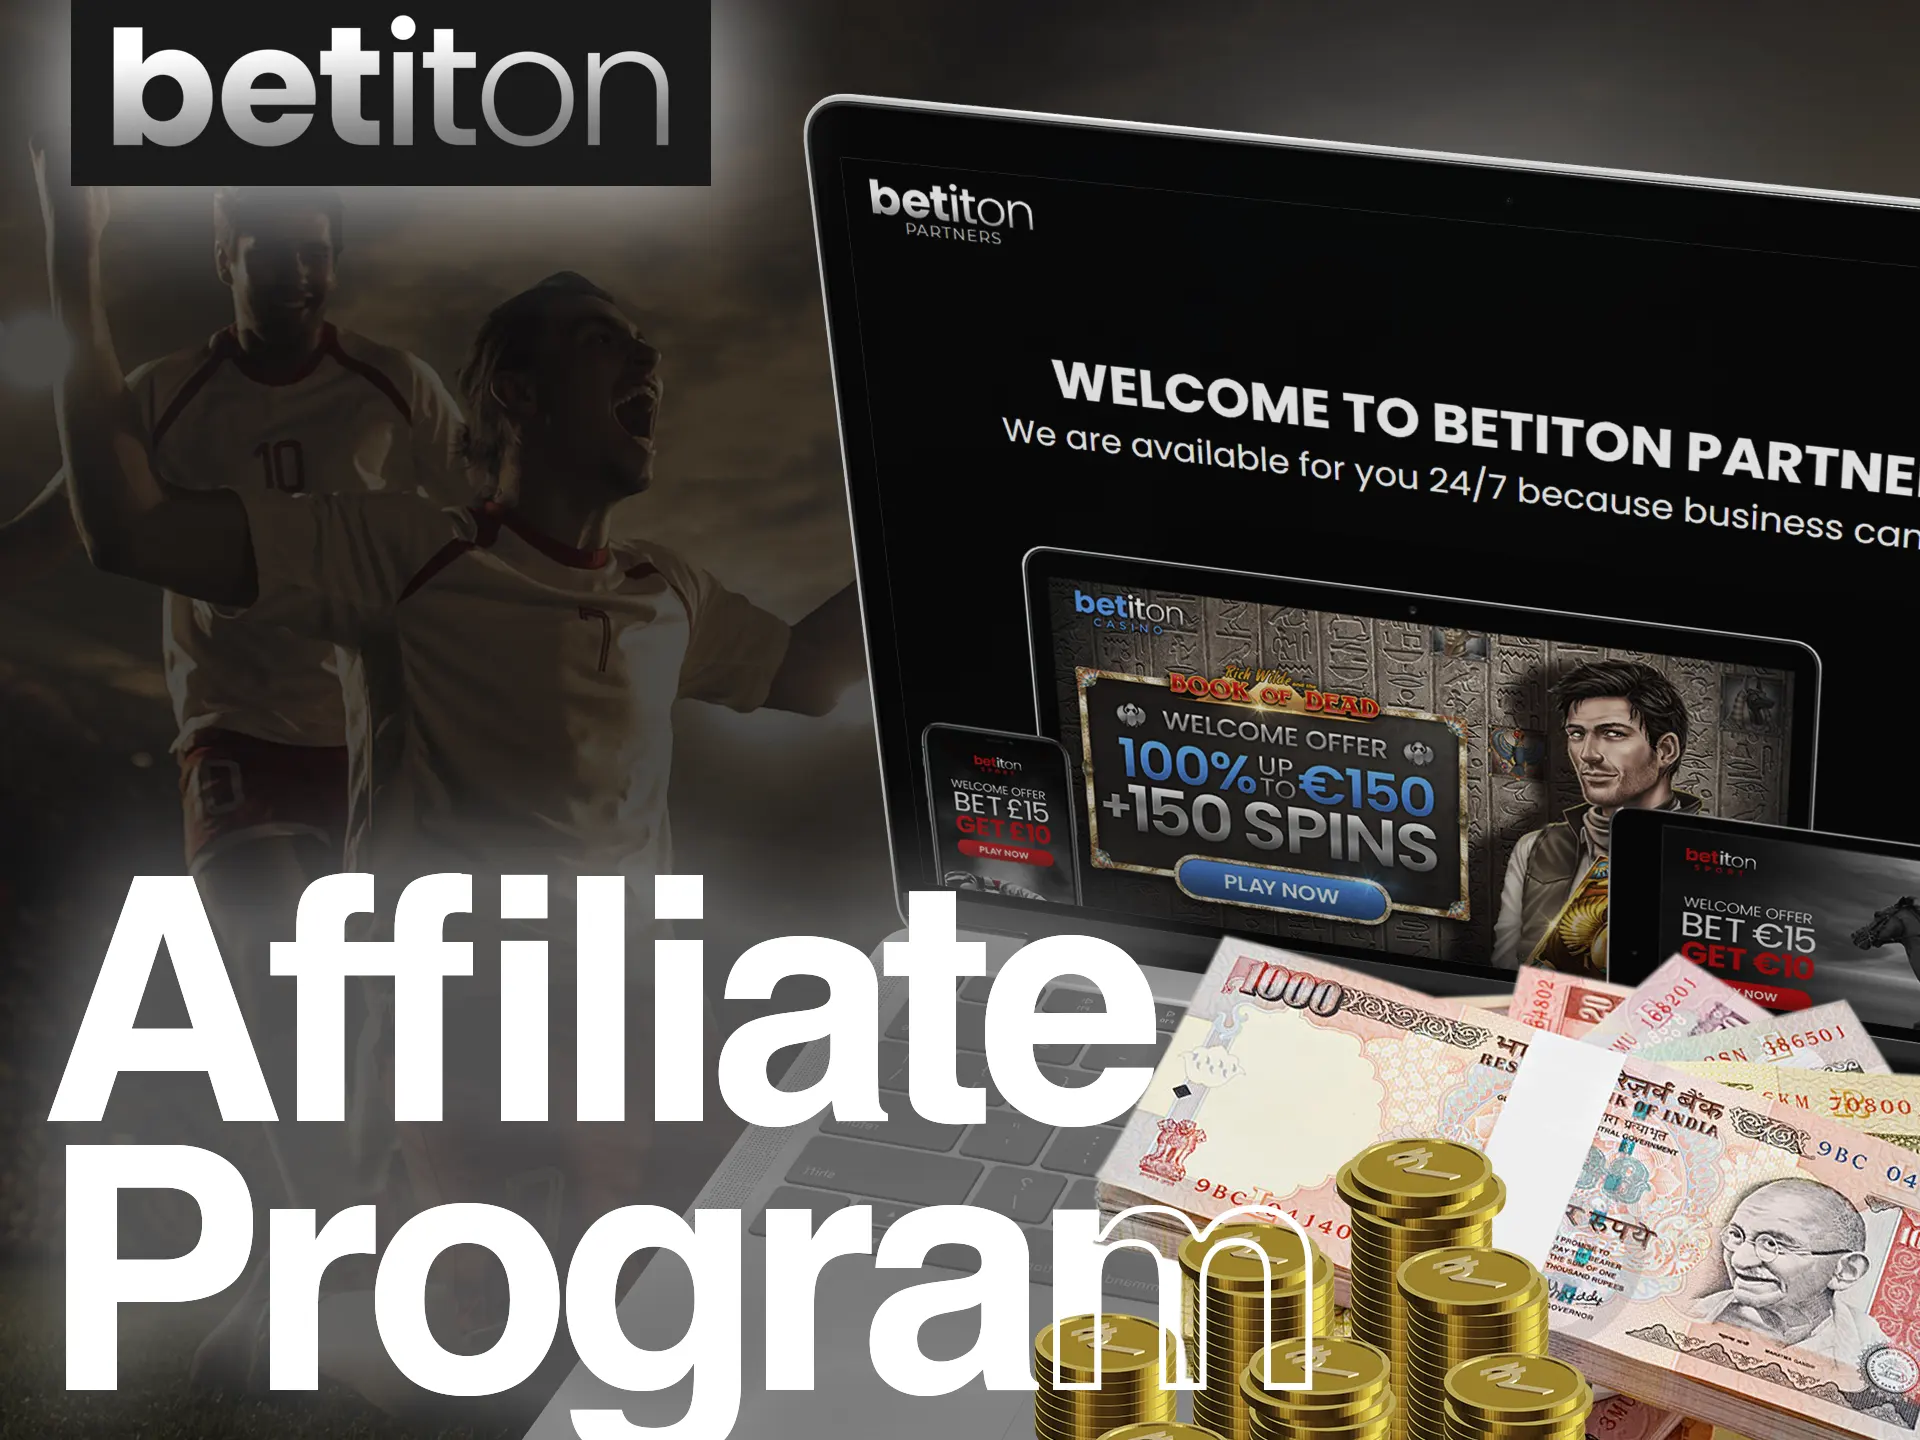 Invite your friends to Betiton using the affiliate program.